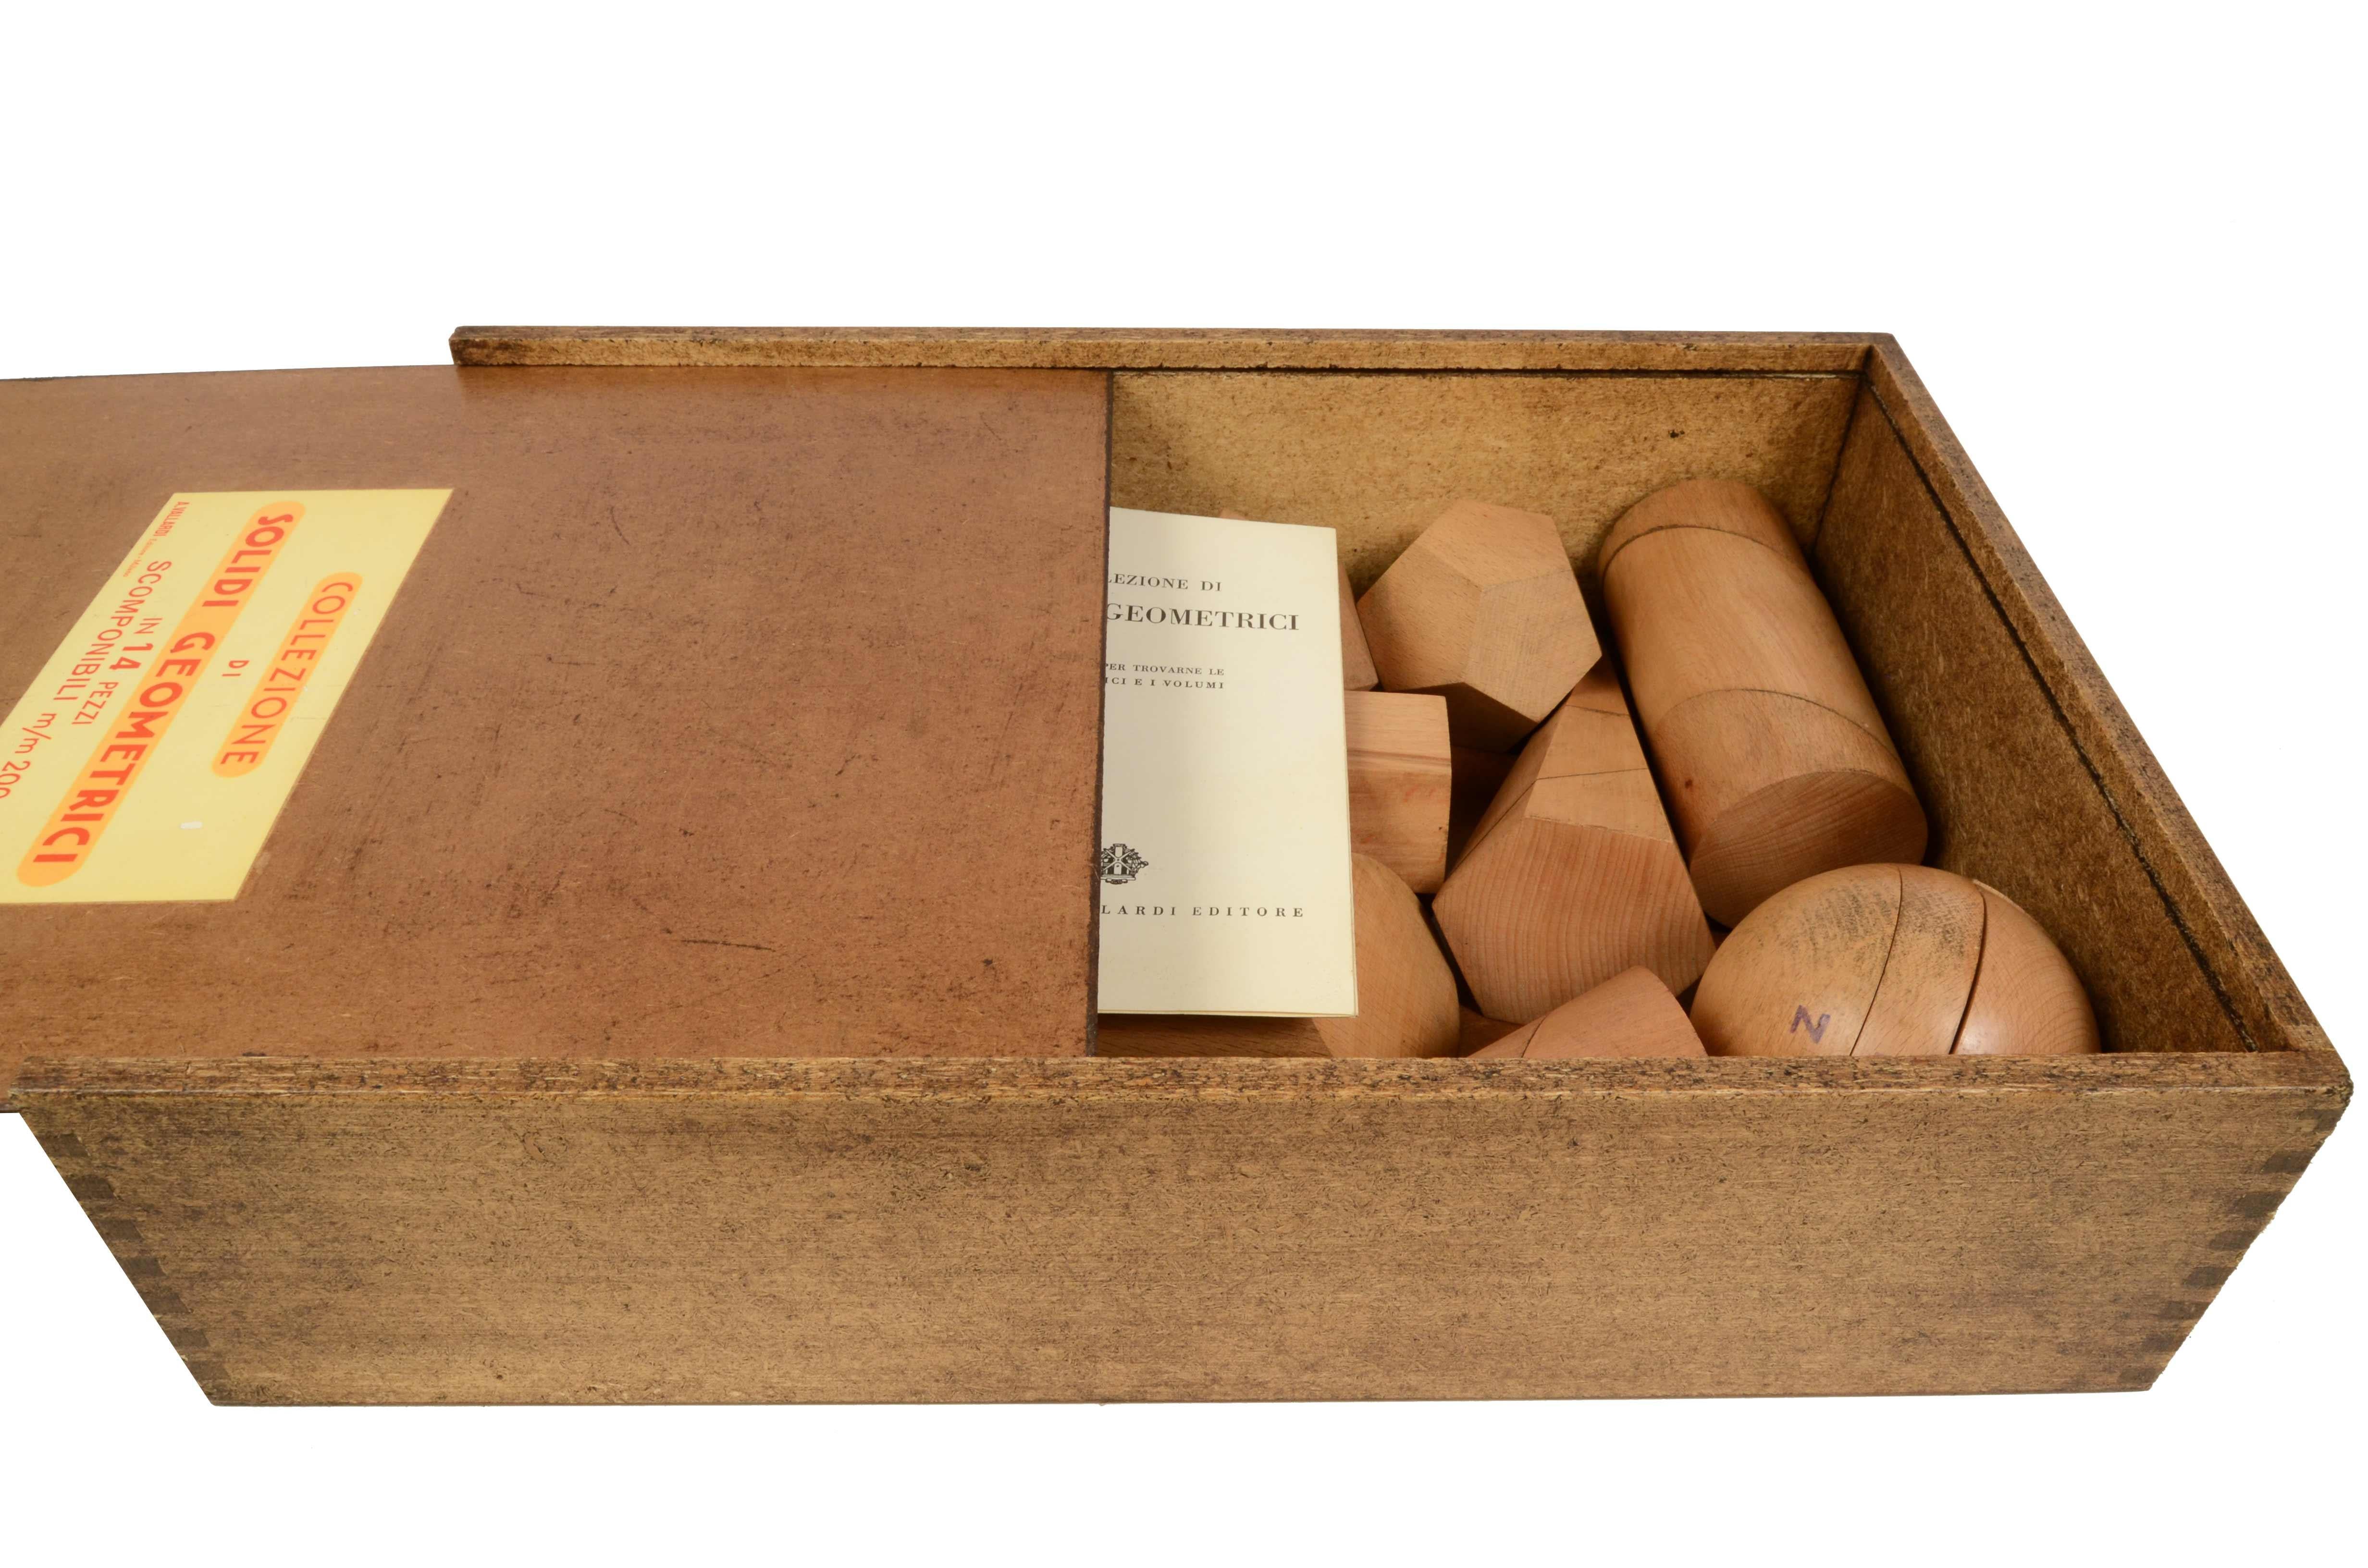 Box containing 14 dismounplate geometric solids of oak wood, height 20 cm, inch 7.9 in their original wooden box complete with illustrative leaflet for calculating surfaces and volumes. 
Made for educational purposes for schools by Antonio Vallardi